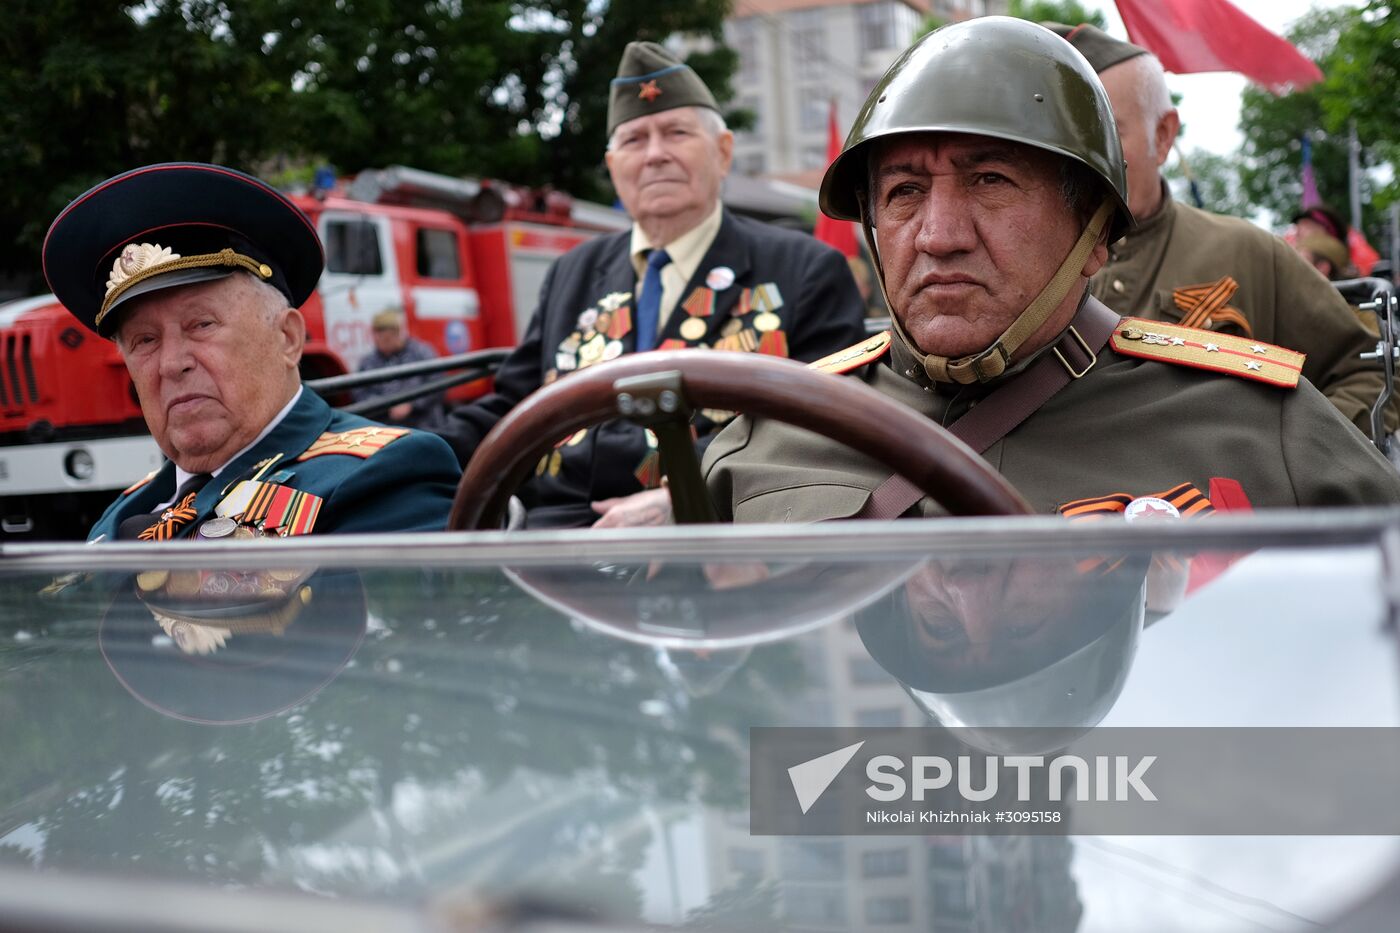 Military parade marking the 72nd anniversary of Victory in cities of Russia